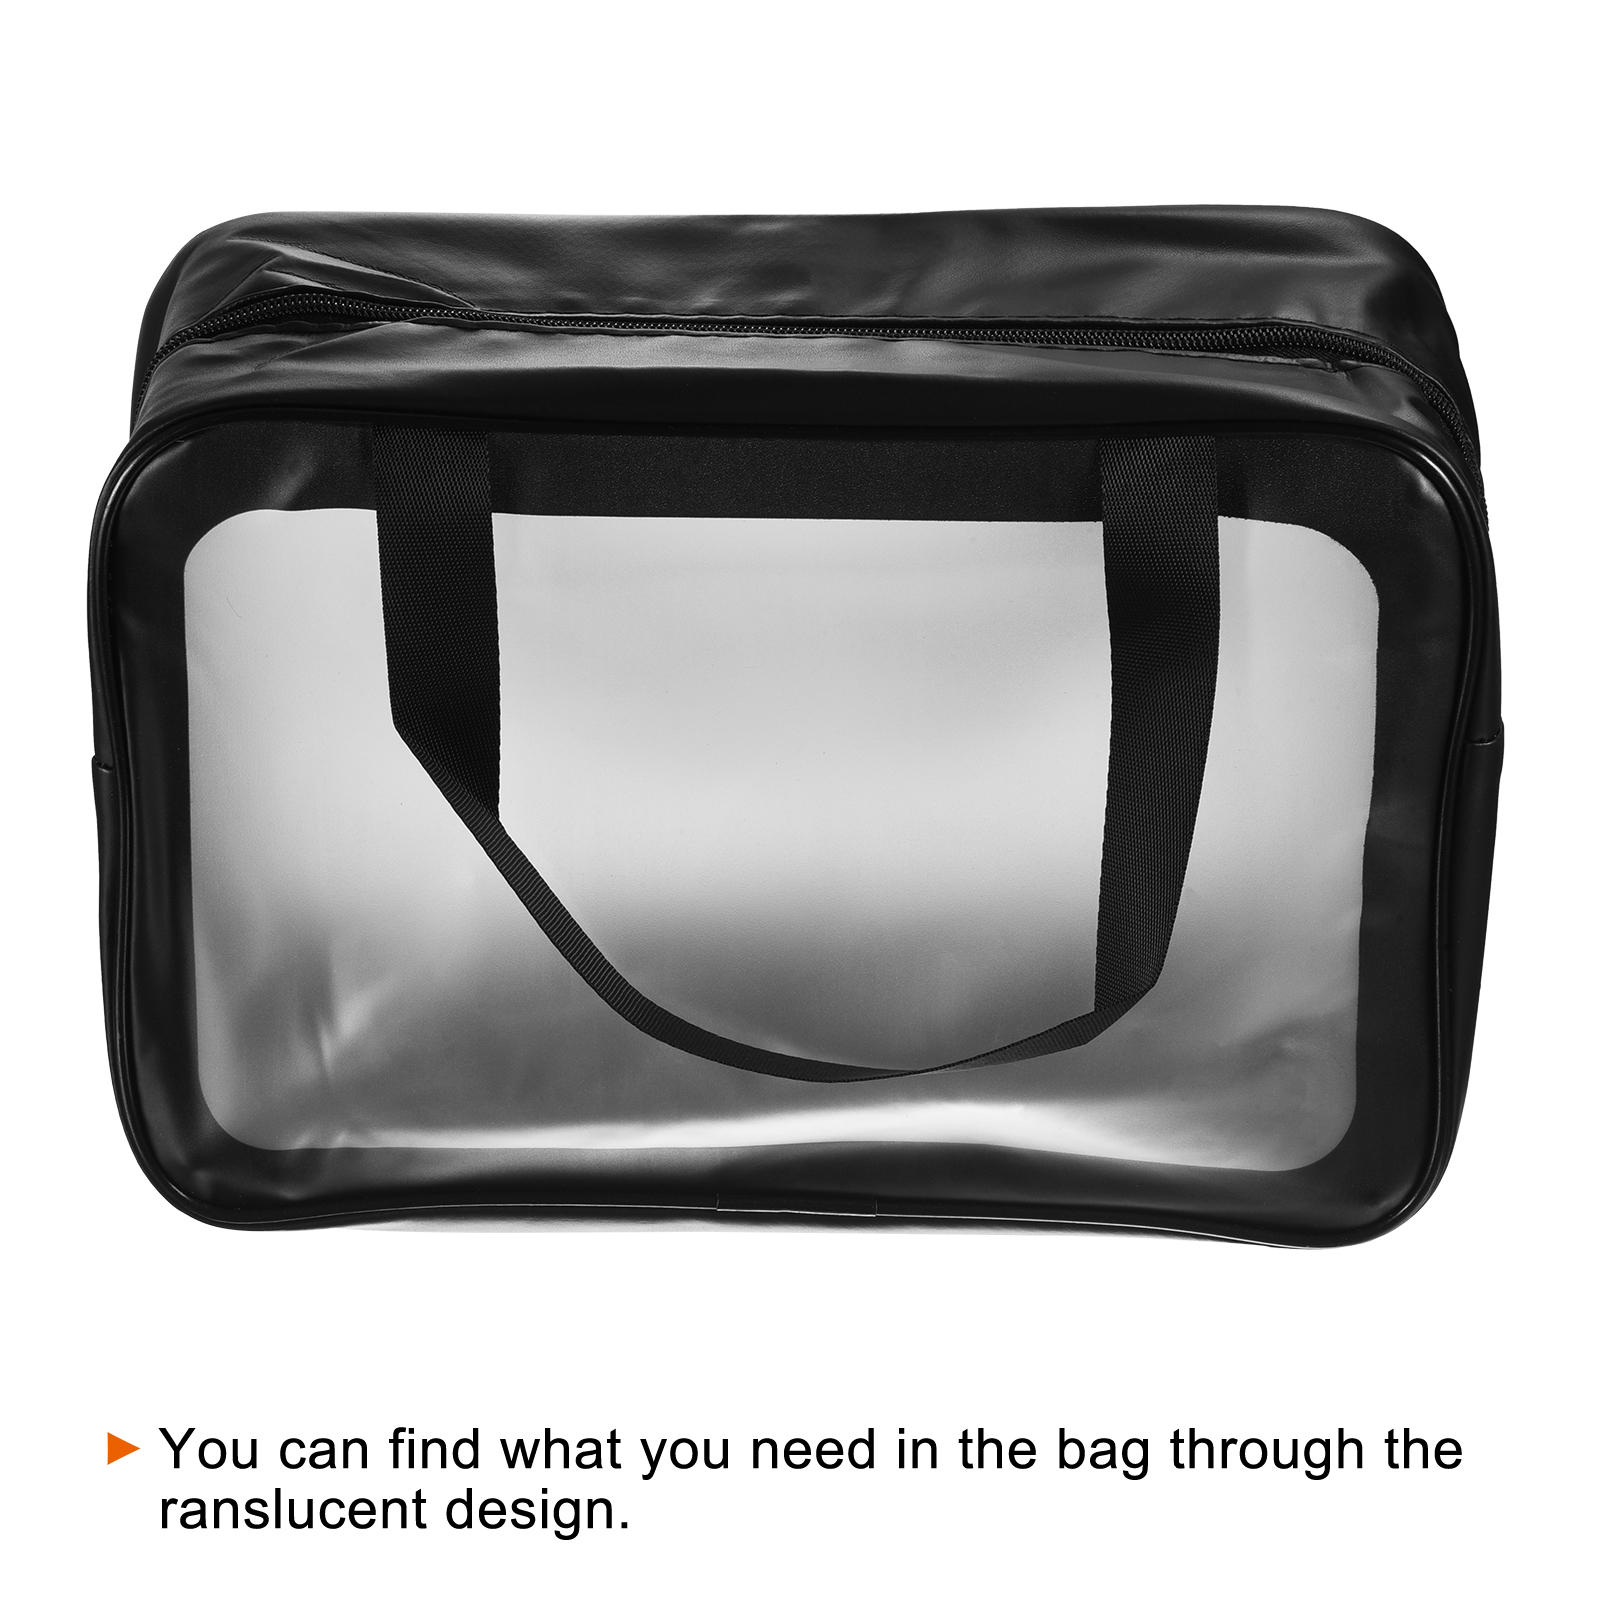 Uxcell 8.3"x11.8"x5.1" PVC Clear Toiletry Bag Makeup Bags with Zipper Handle Black 2 Pack - image 3 of 5